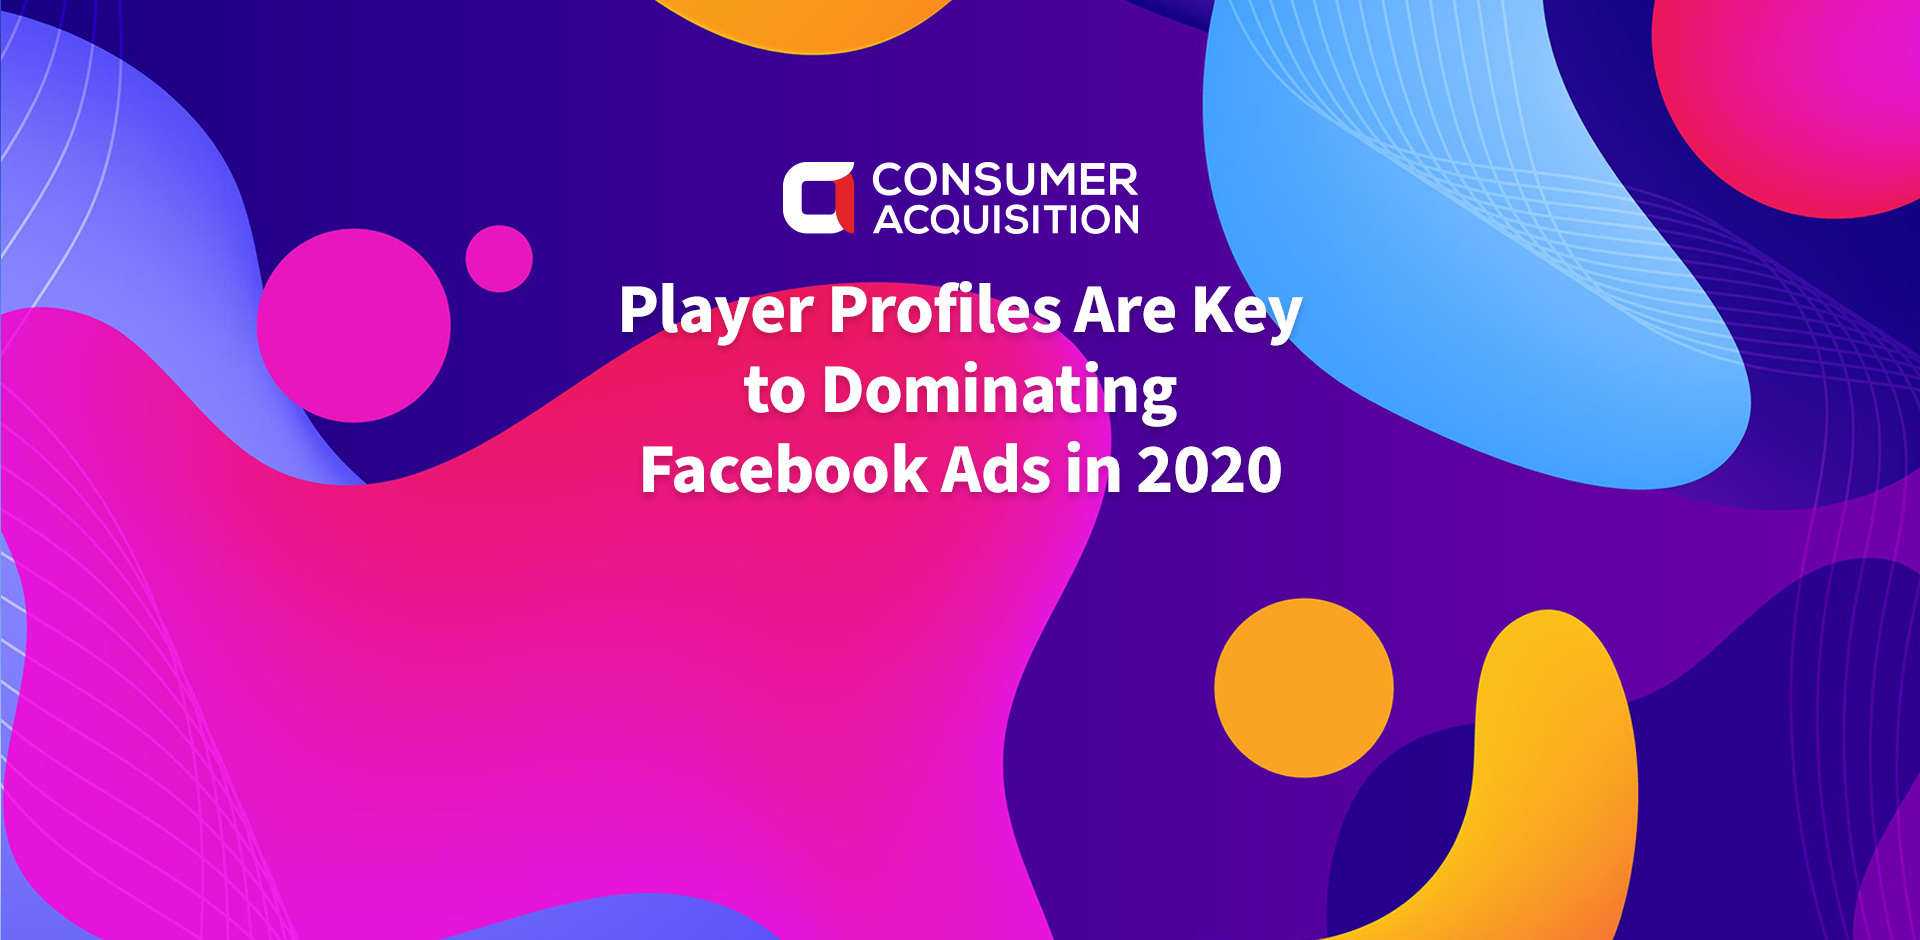 Player Profiles Are Key to Dominating Facebook Ads in 2020